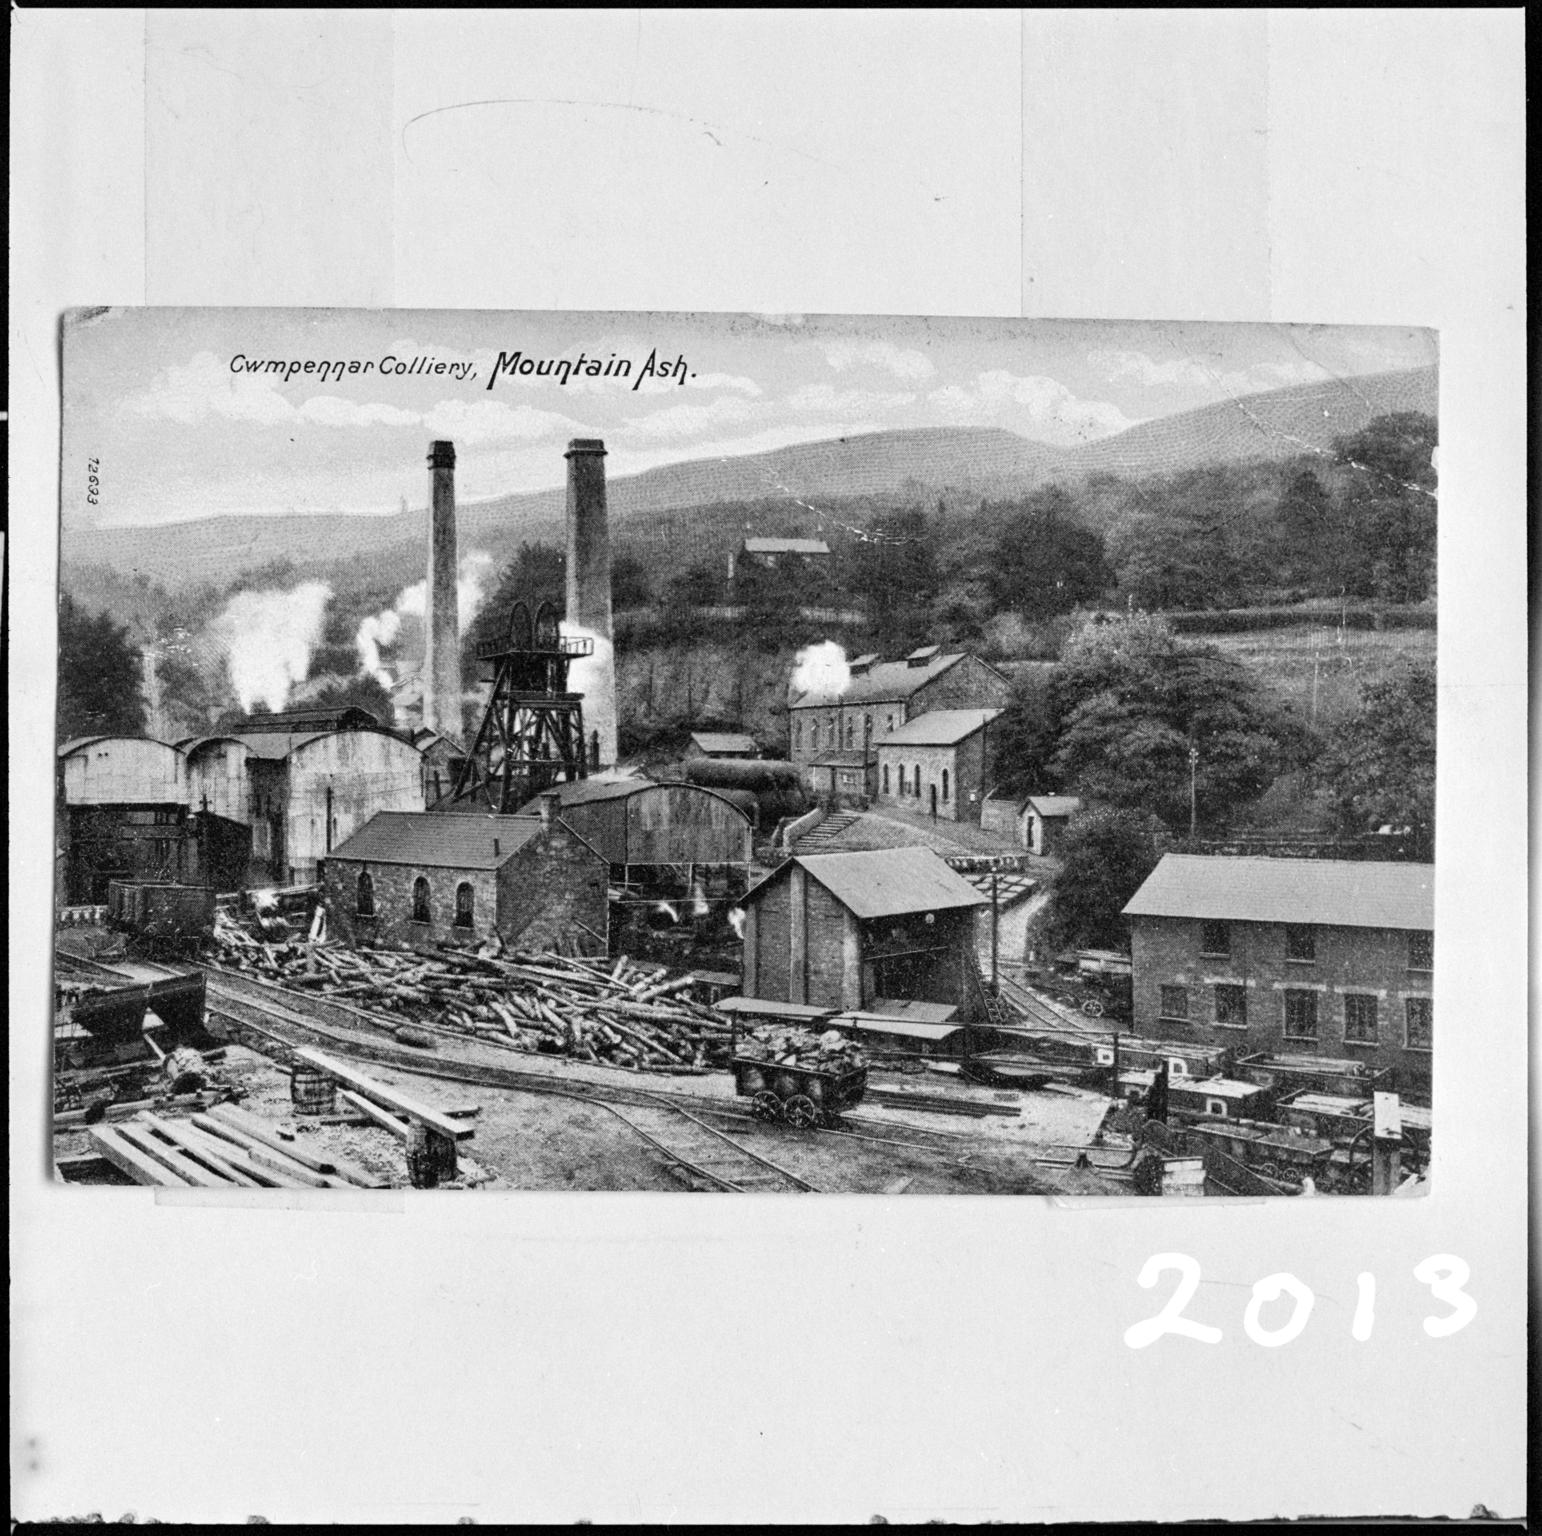 Cwmpennar Colliery, film negative